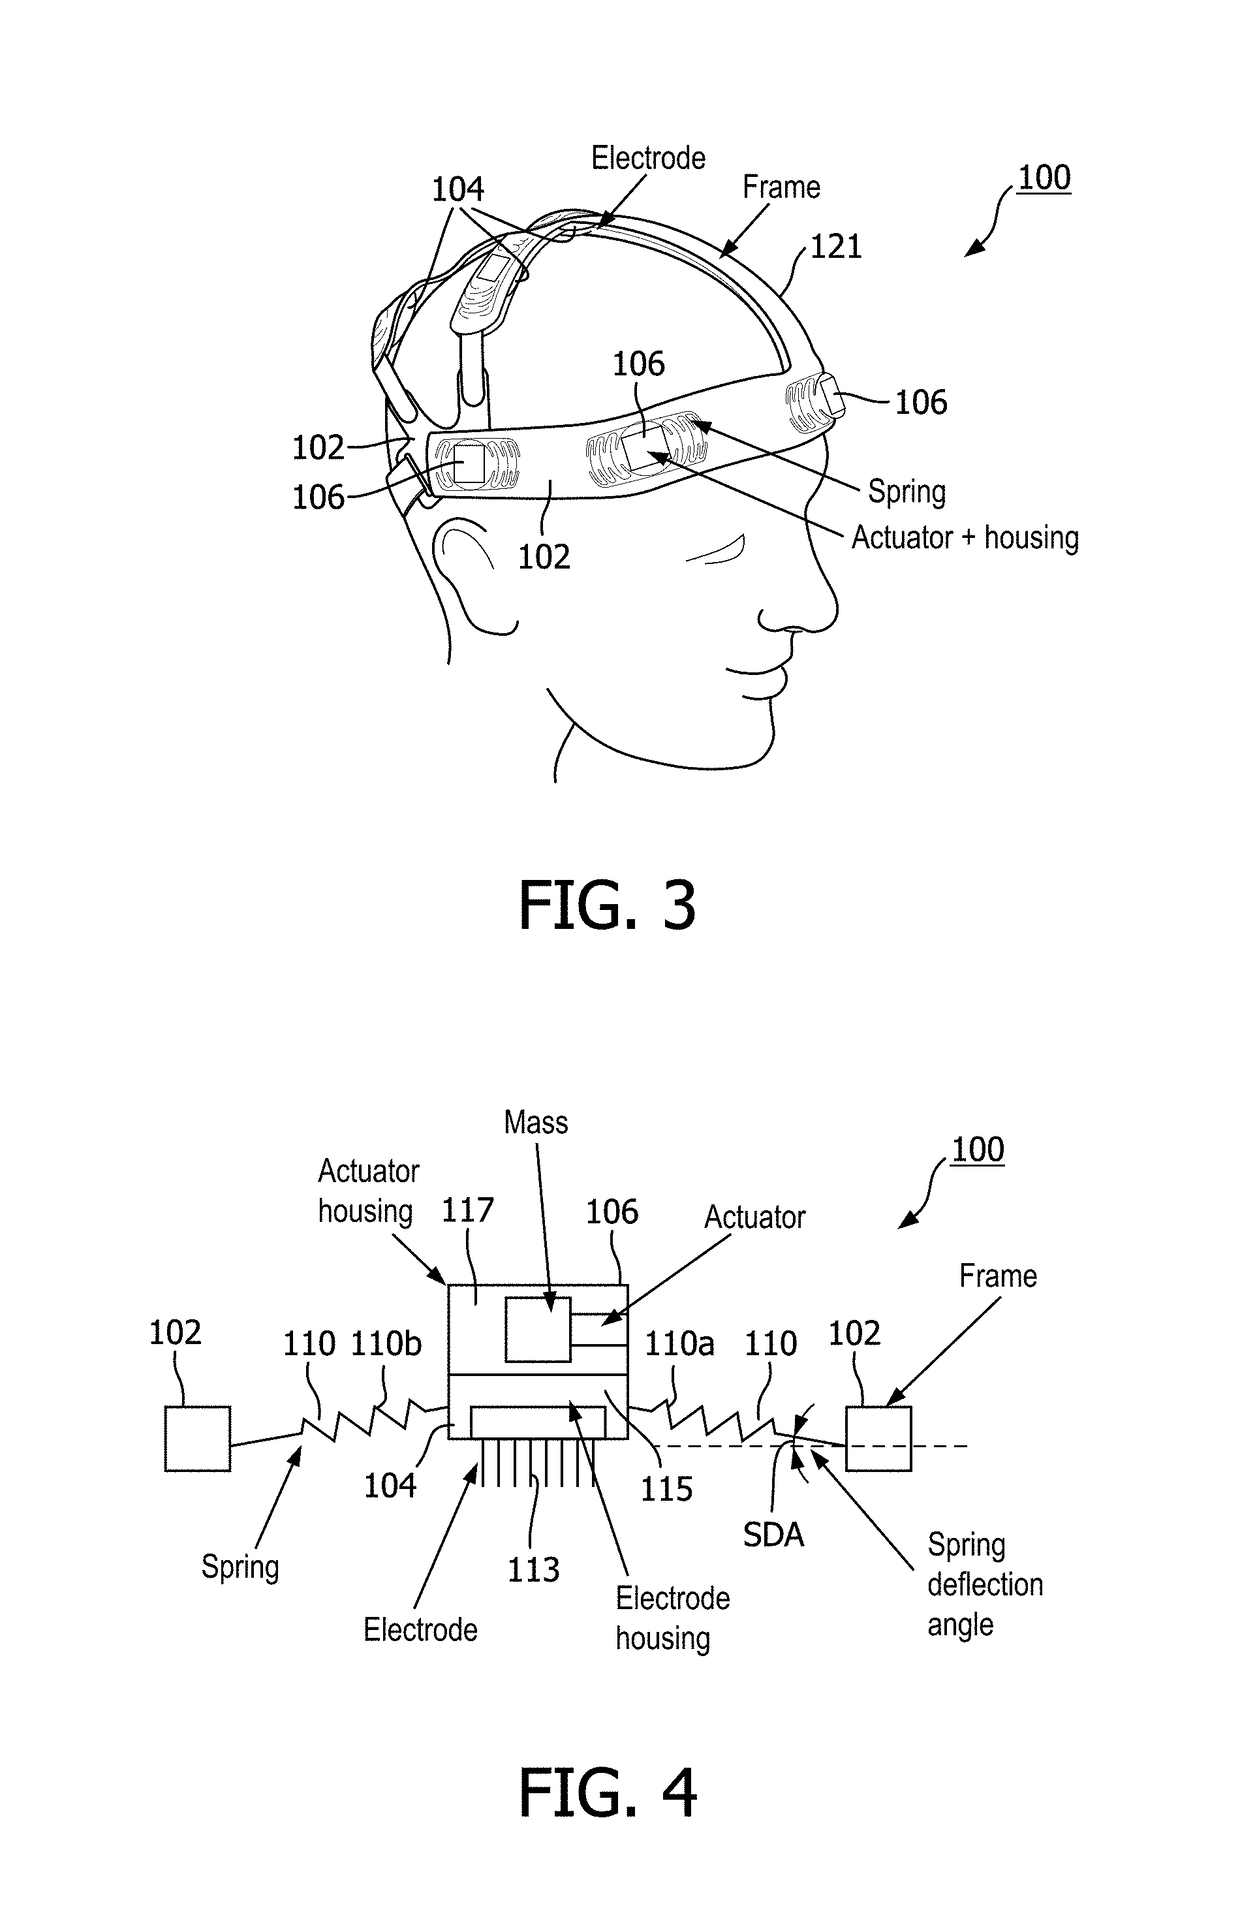 Method and system for obtaining signals from dry eeg electrodes